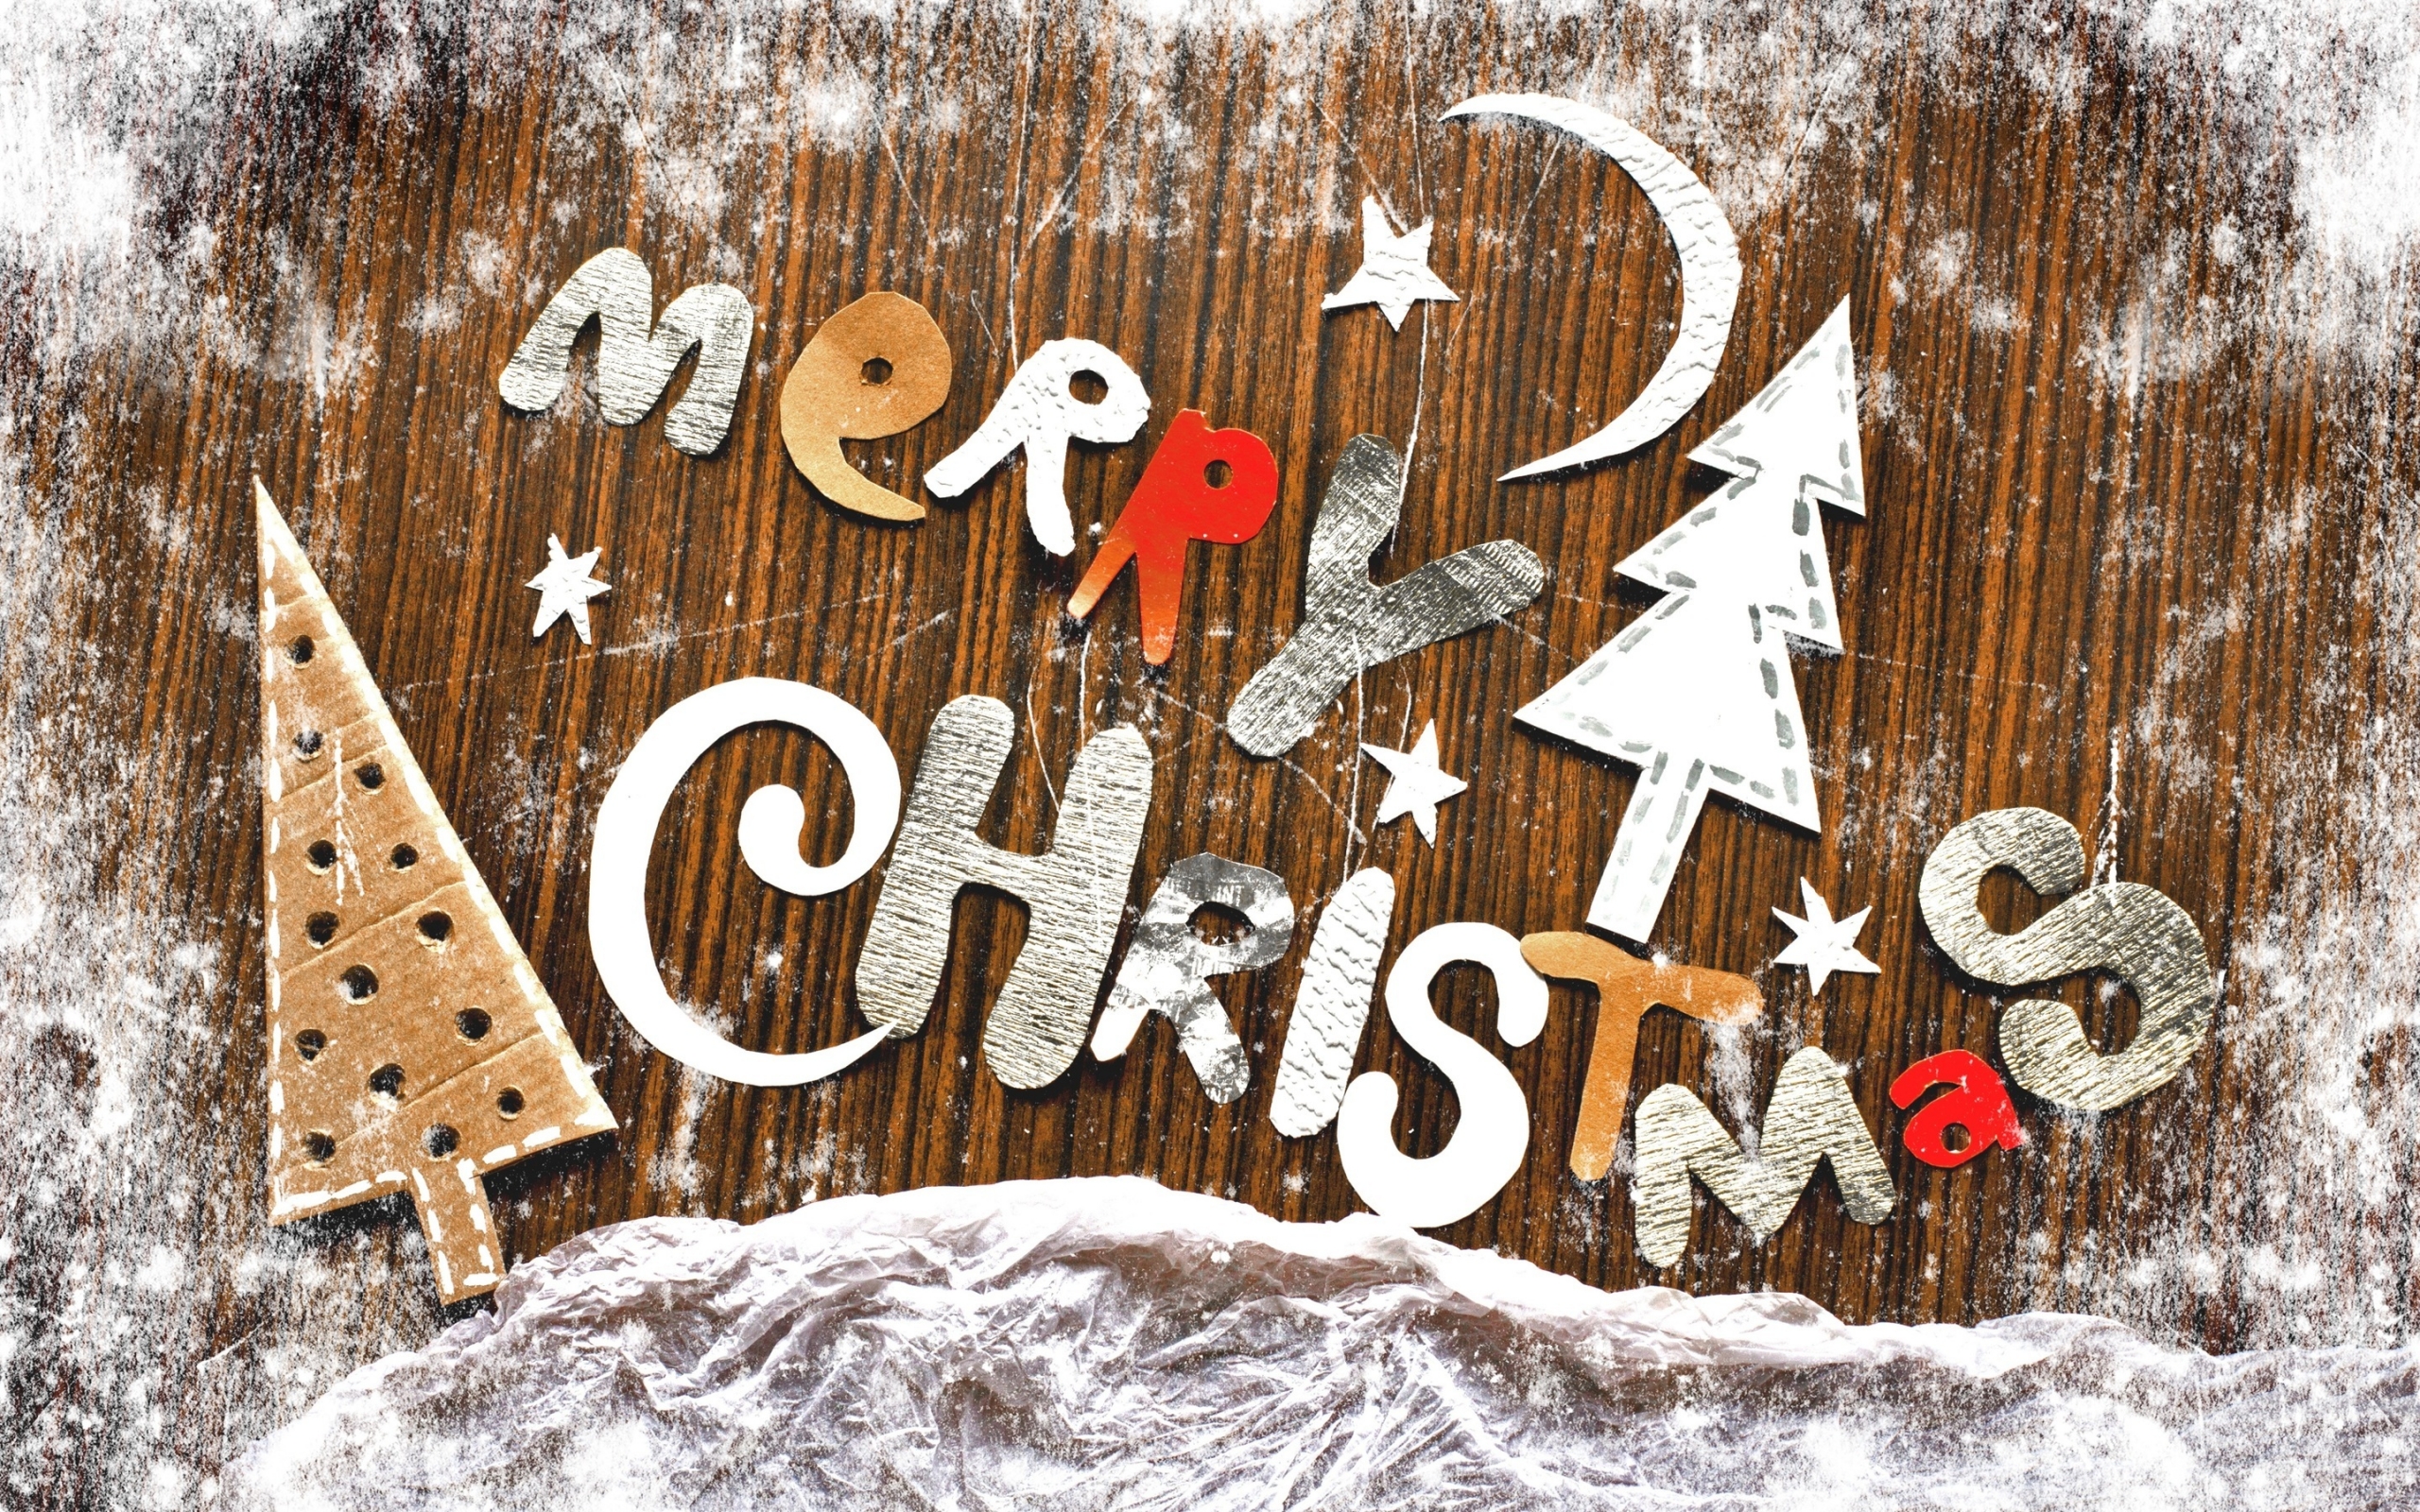 Merry Christmas Wish for 2560 x 1600 widescreen resolution